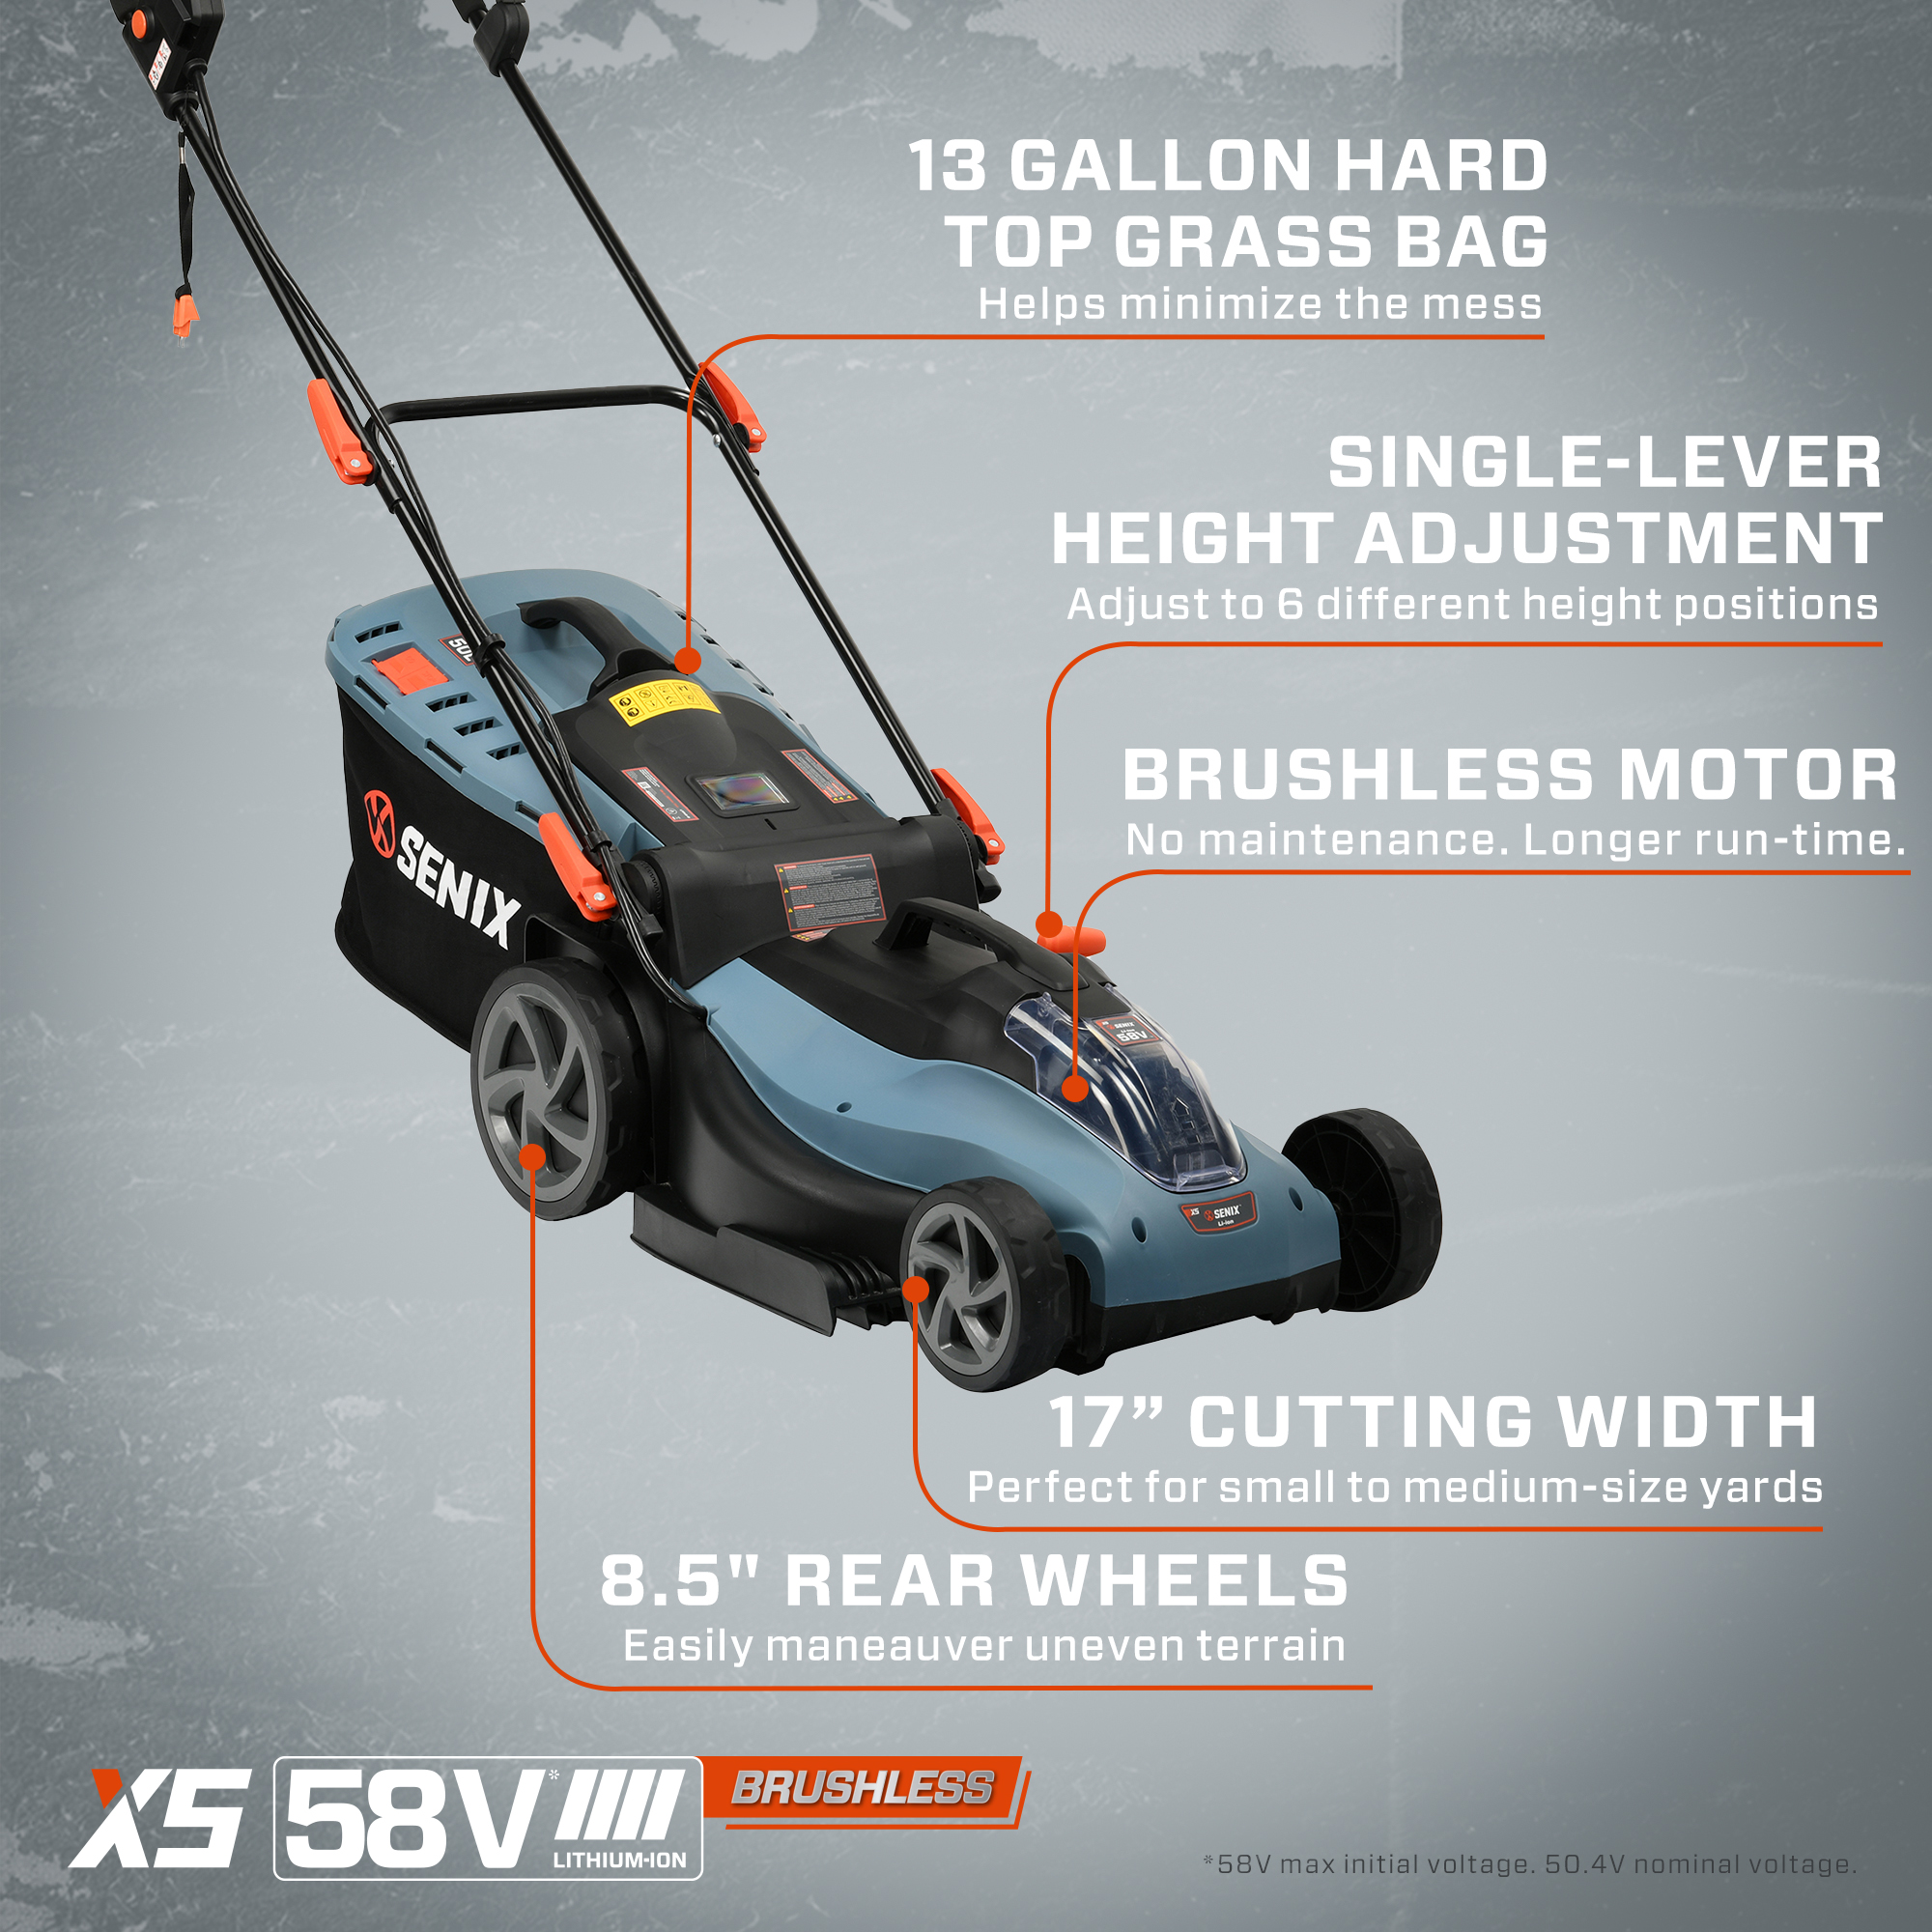 SENIX 58 Volt Max* Cordless Lawn Mower, 17-Inch, Brushless Motor, 6-Position Height Adjustment, 13-Gallon Bagger (Battery and Charger Included) LPPX5-M - image 3 of 12